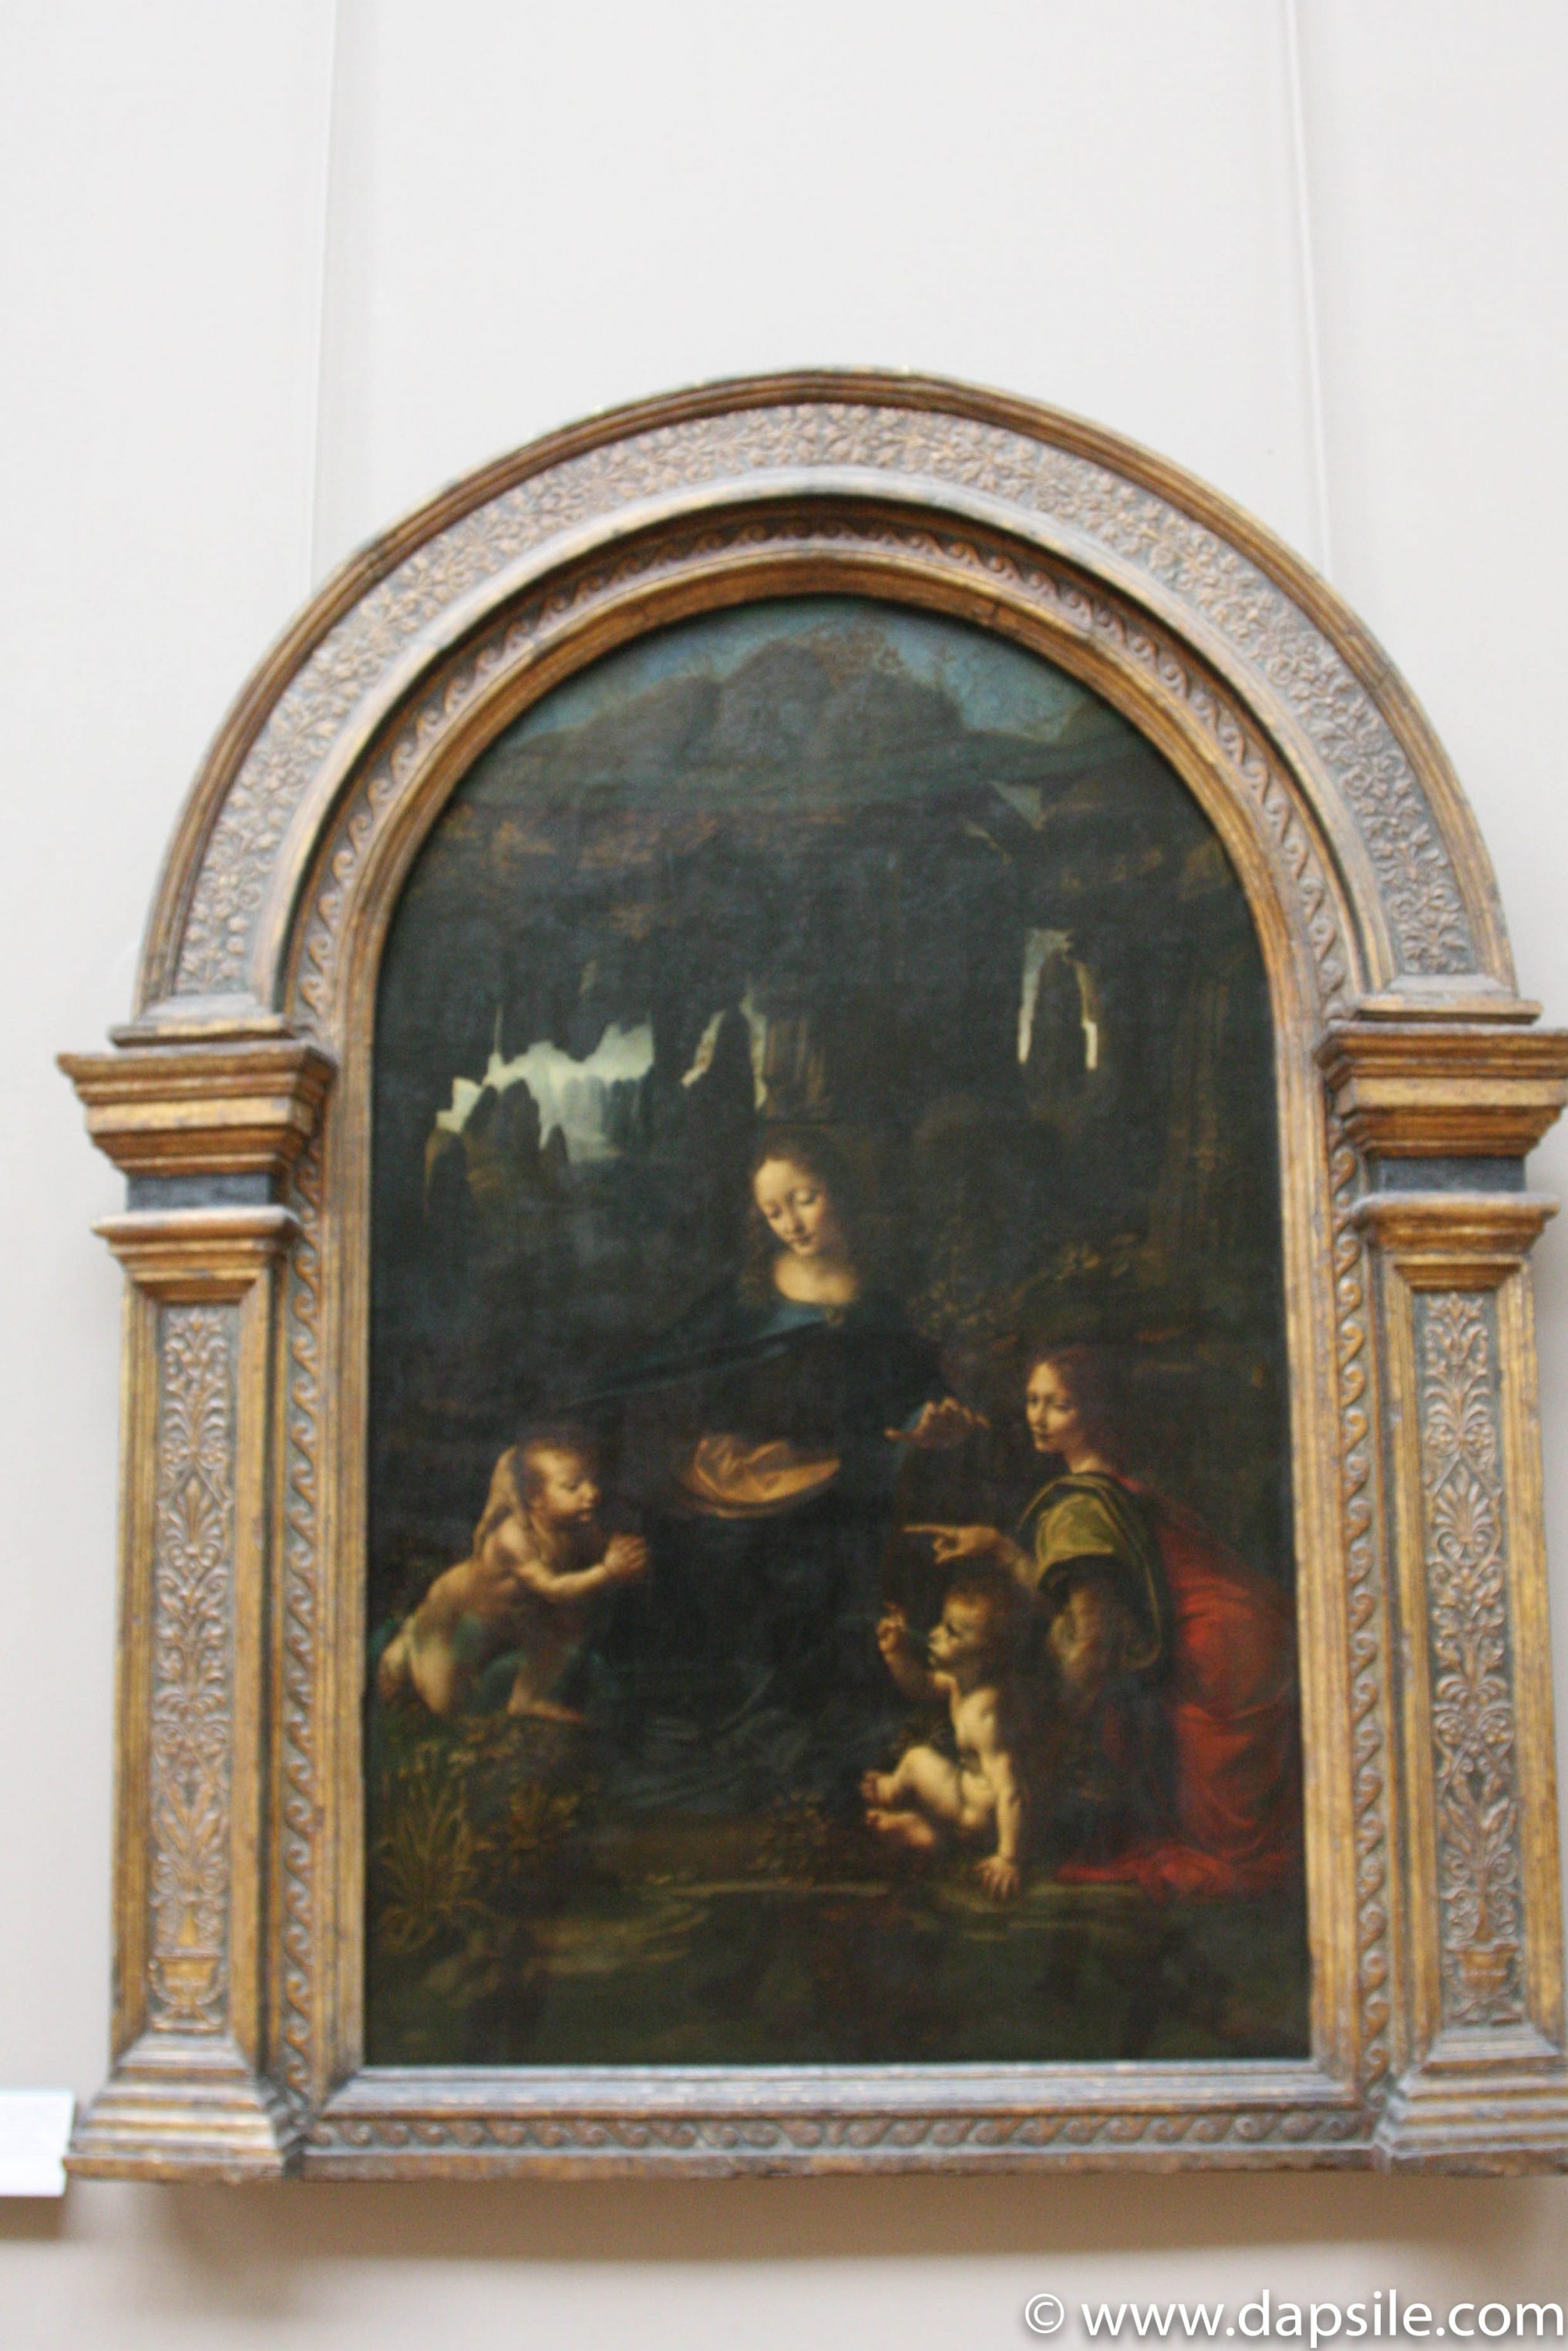 The Virgin of the Rocks painting by Leonardo Da Vinci at the Louvre in Paris